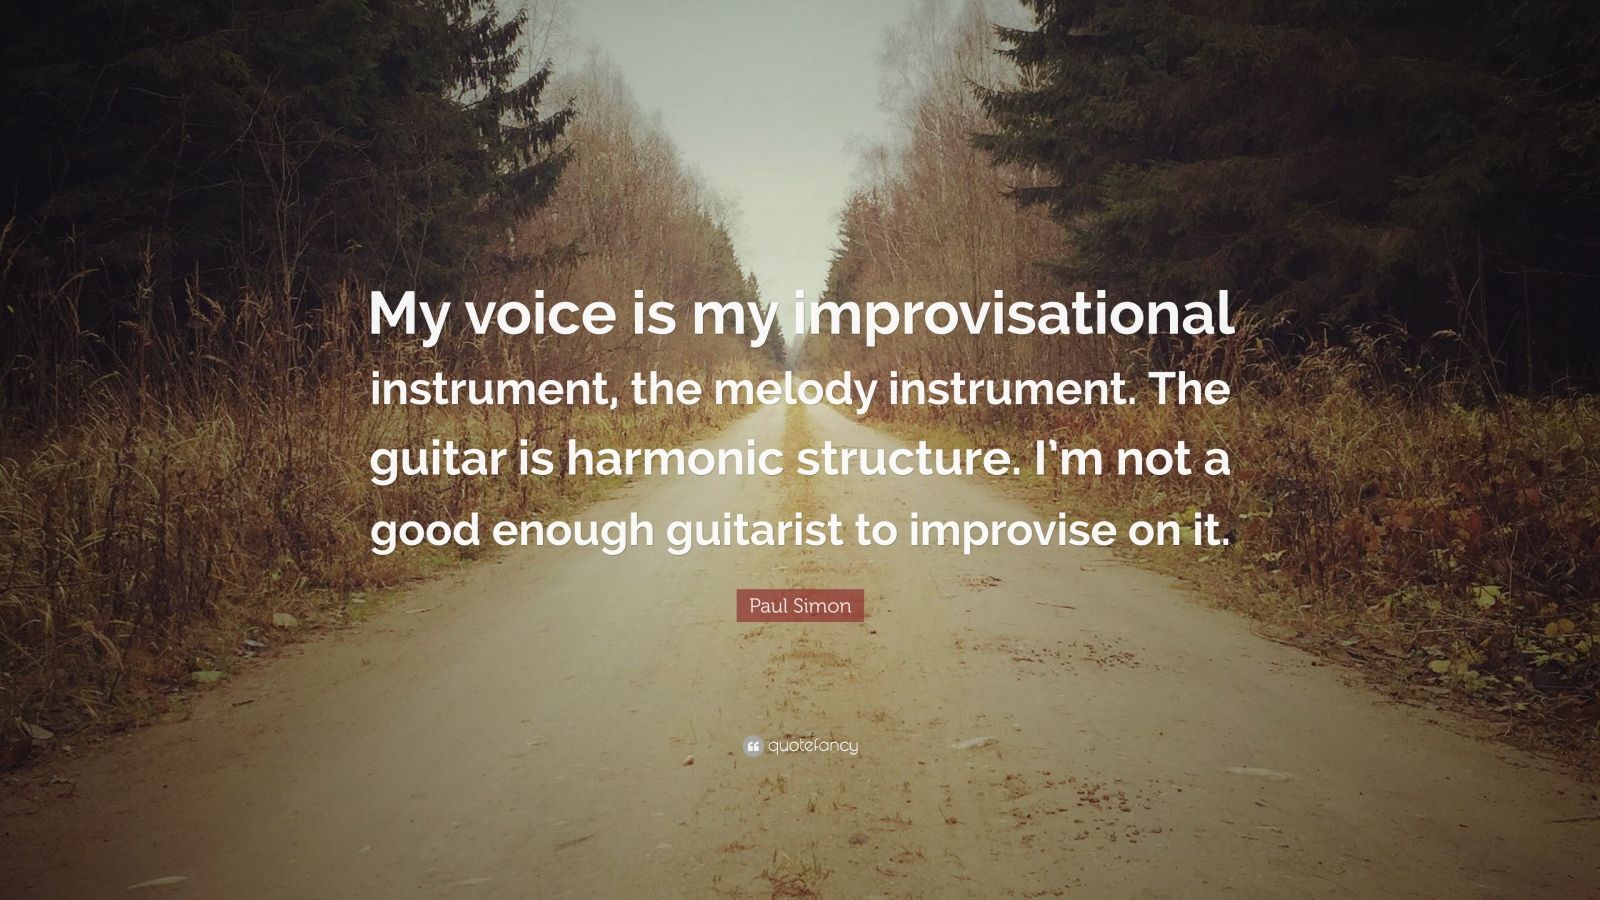 Paul Simon Quote: "My voice is my improvisational instrument, the melody instrument. The guitar ...